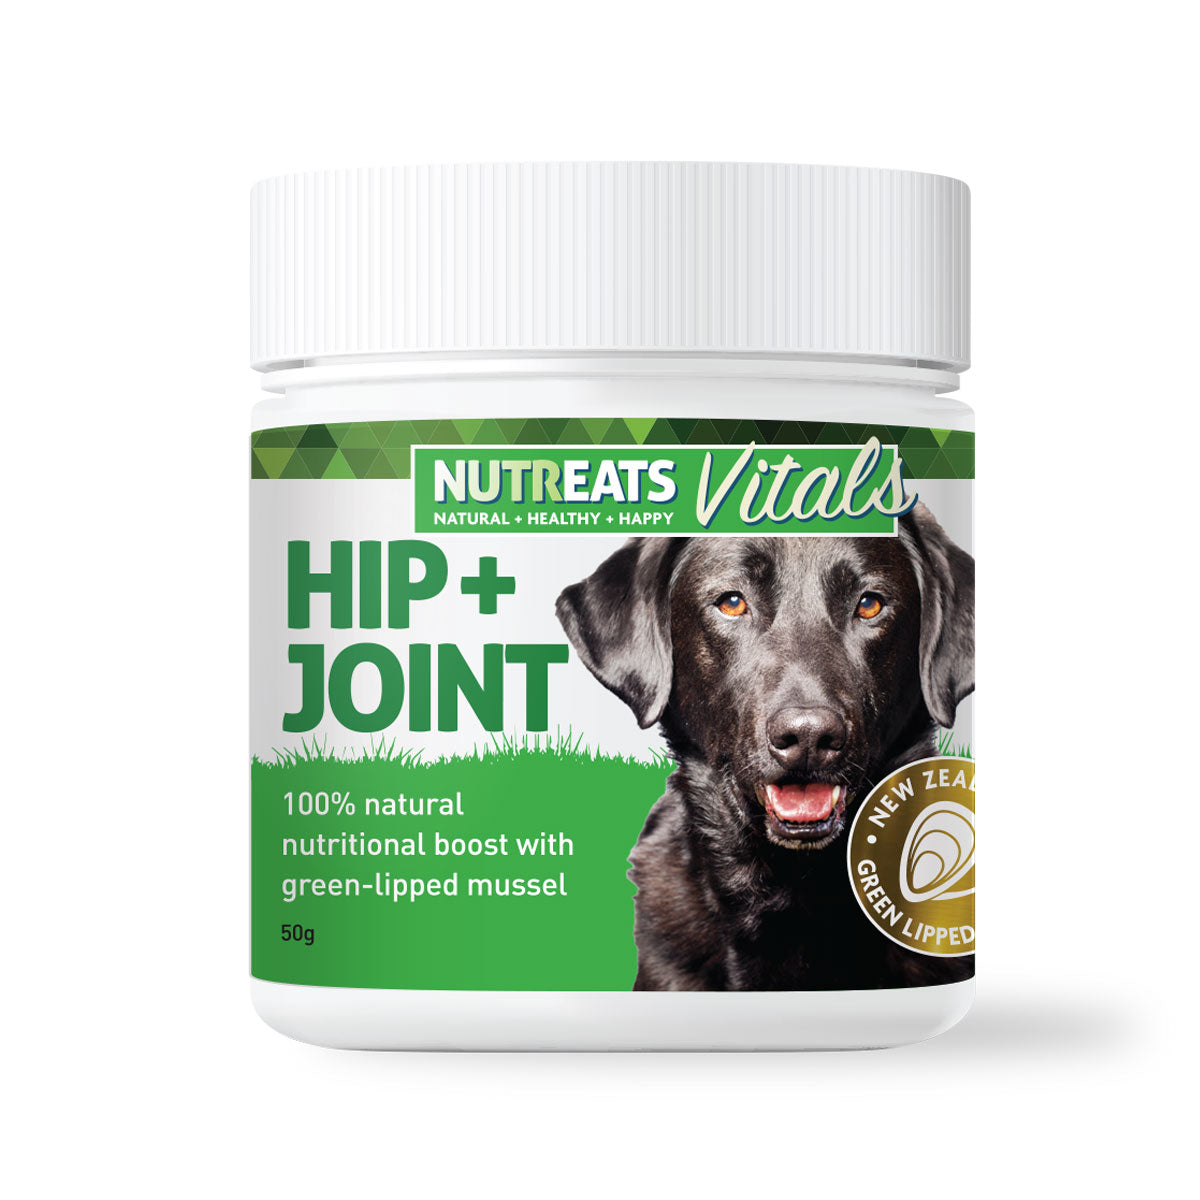 Nutreats Vitals Hip & Joint powder for dogs - supporting naturally healthy hips and joints in dogs. Rich in Omega 3 and a rich source of chondroitin. totally natural feed supplement for dogs supporting healthy hips and joints.